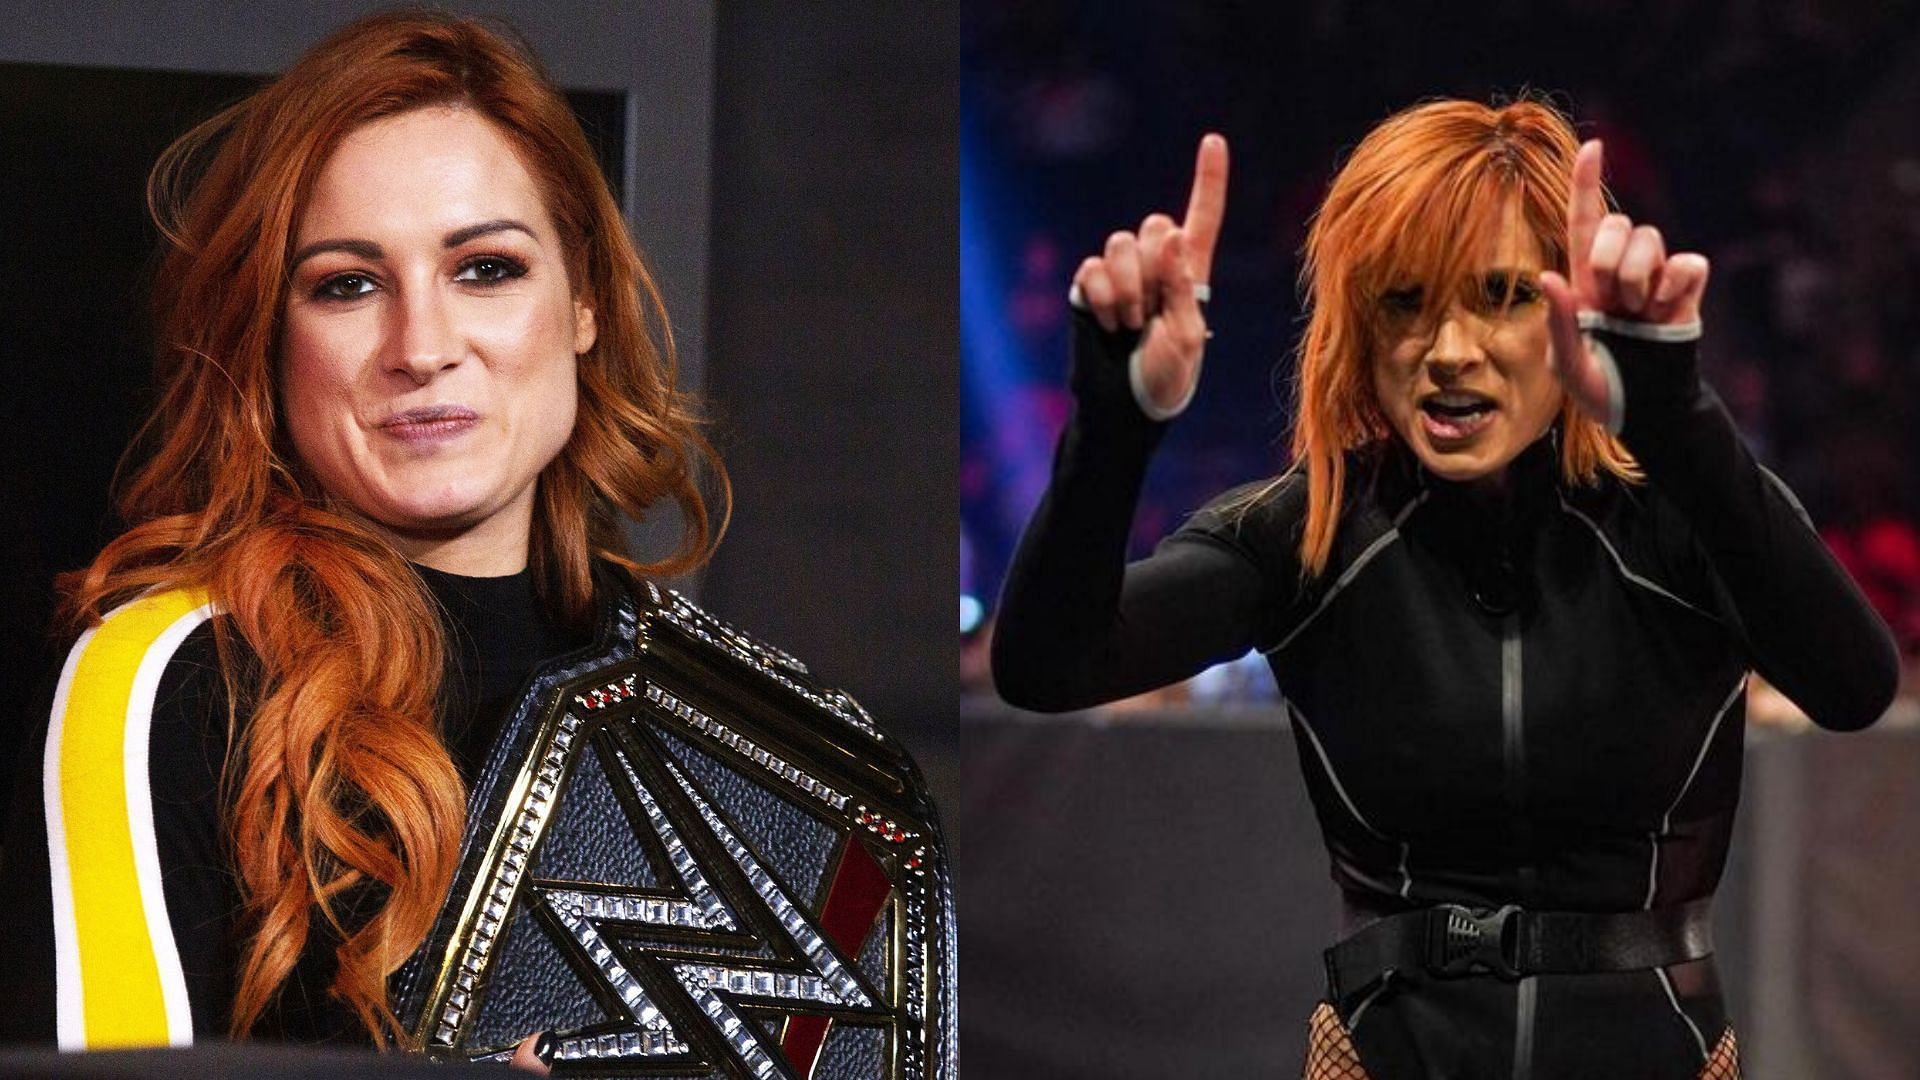 Becky Lynch is the current WWE Women